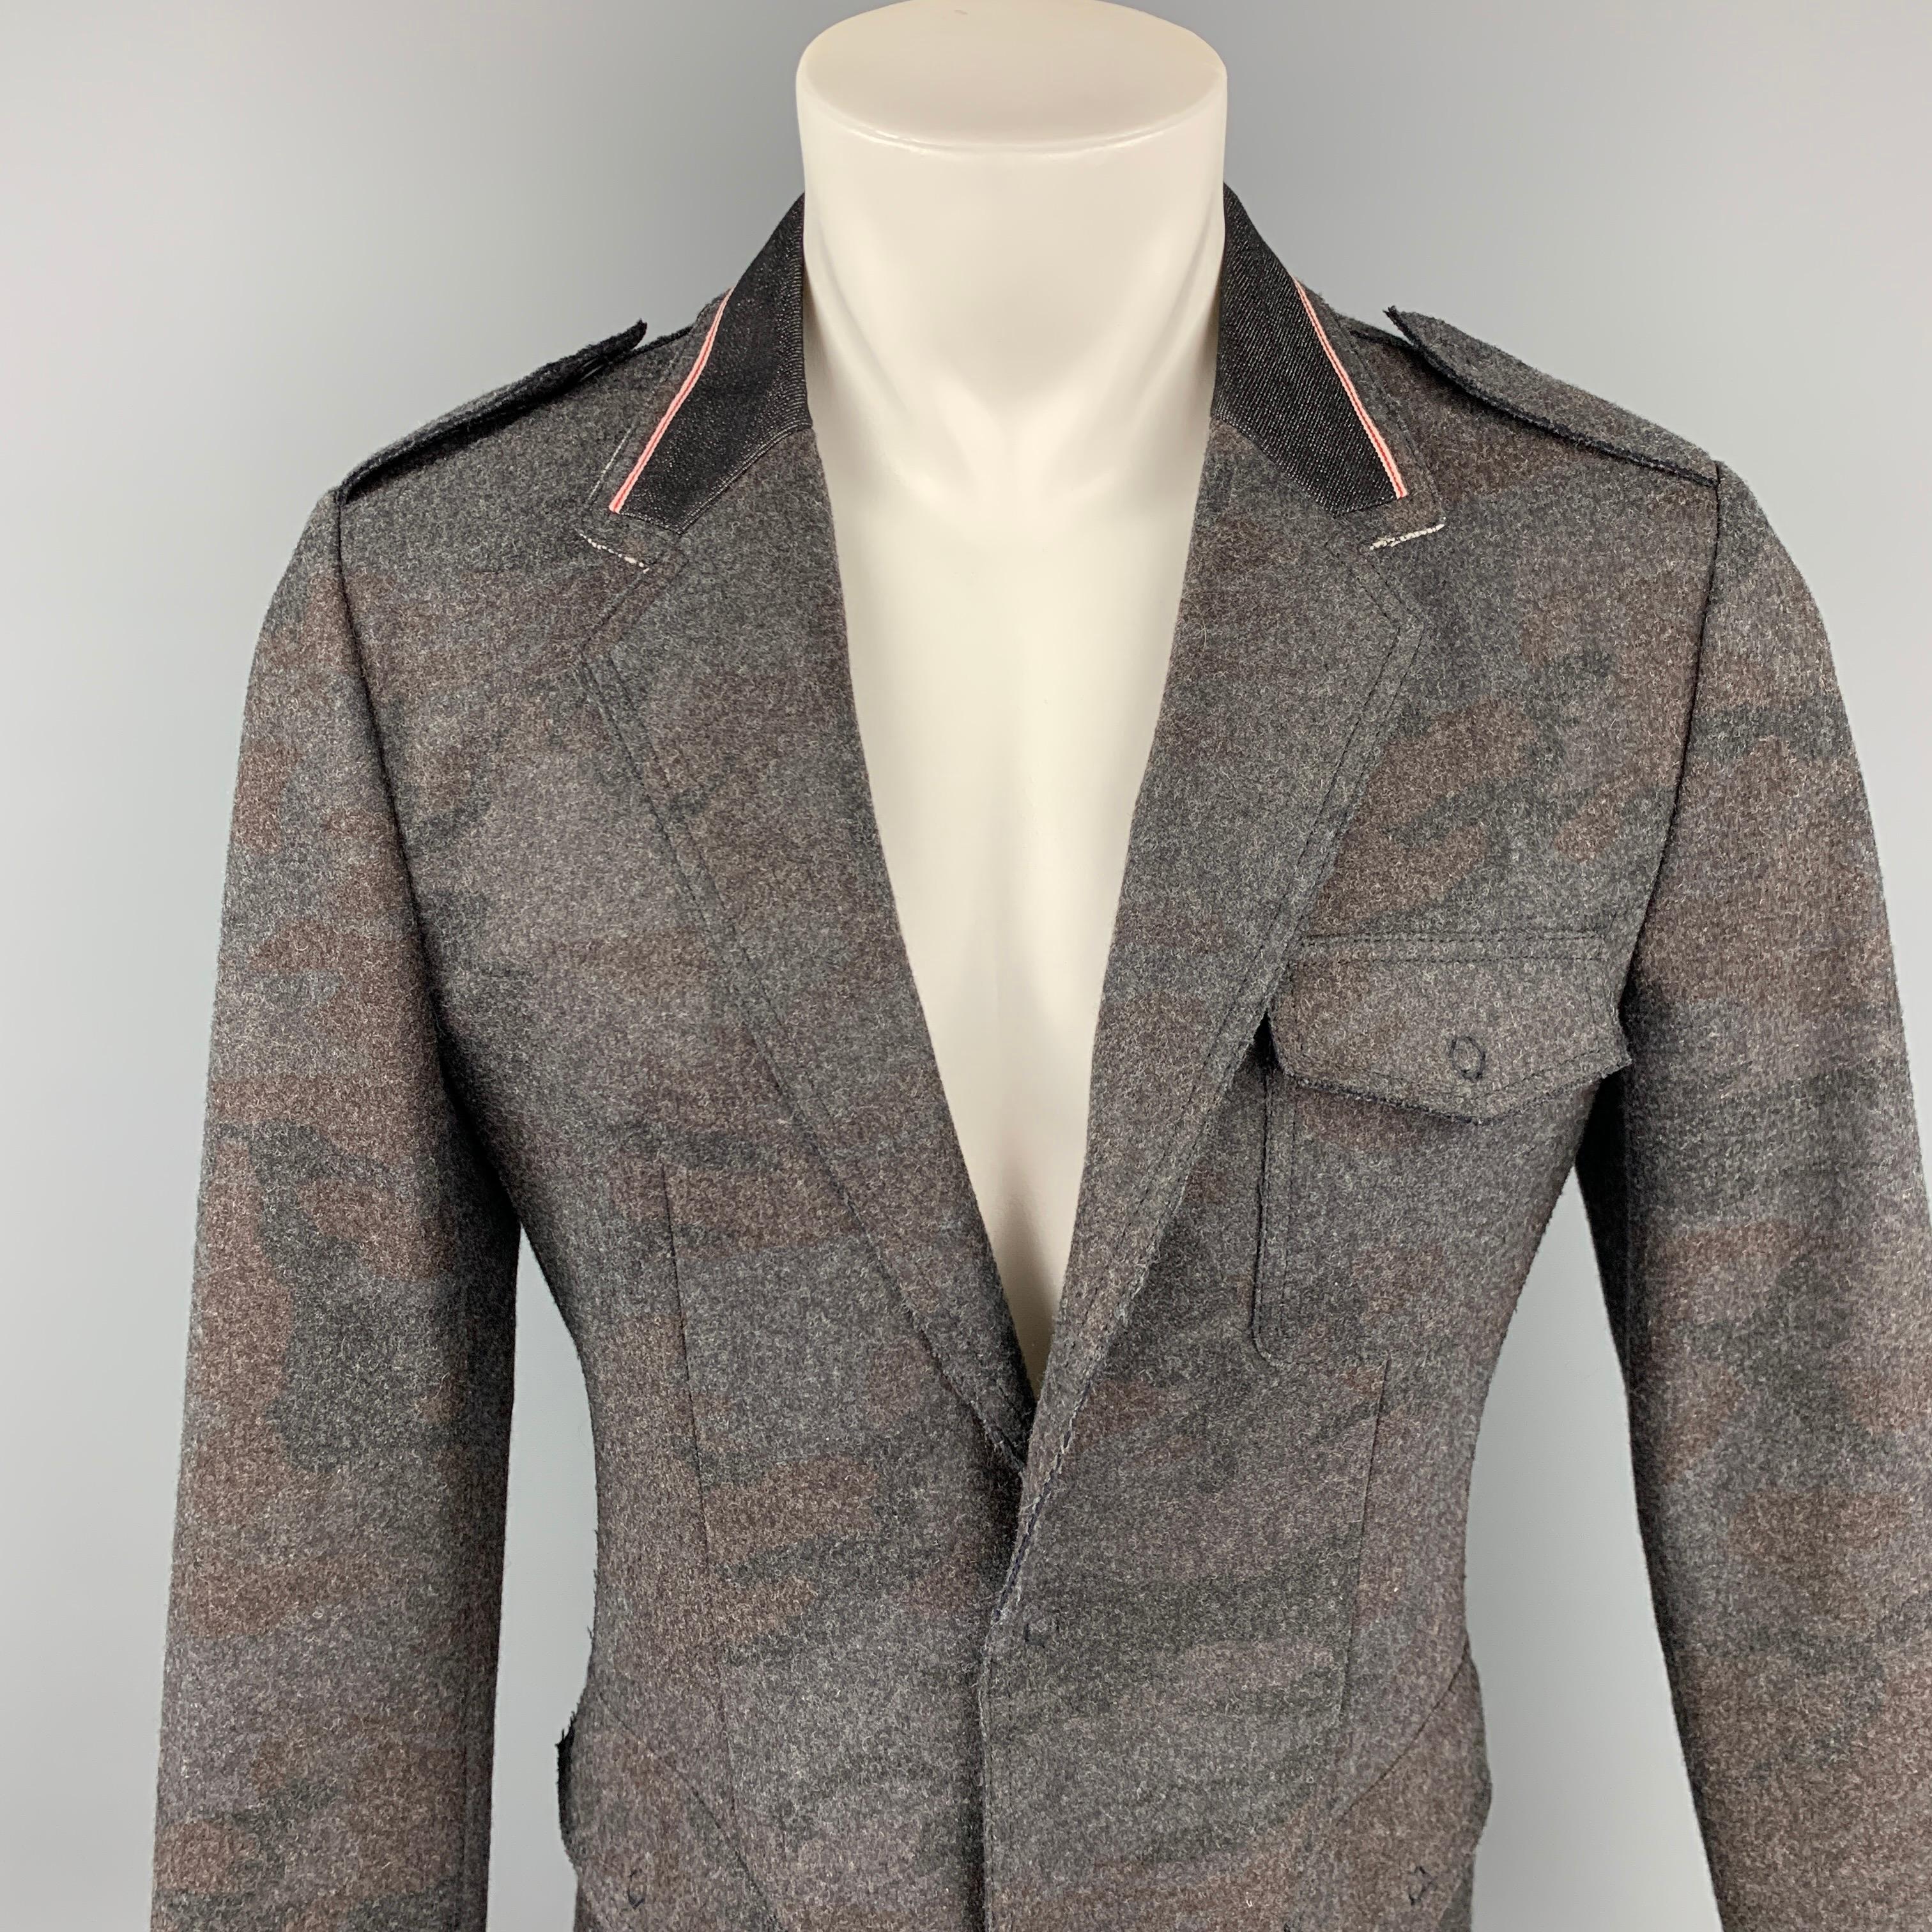 EMPORIO ARMANI jacket comes in a dark gray camouflage material with a denim collar featuring a notch lapel, flap pockets, and a snap button closure. Made in Italy.

Very Good Pre-Owned Condition.
Marked: No size marked

Measurements:

Shoulder: 17.5